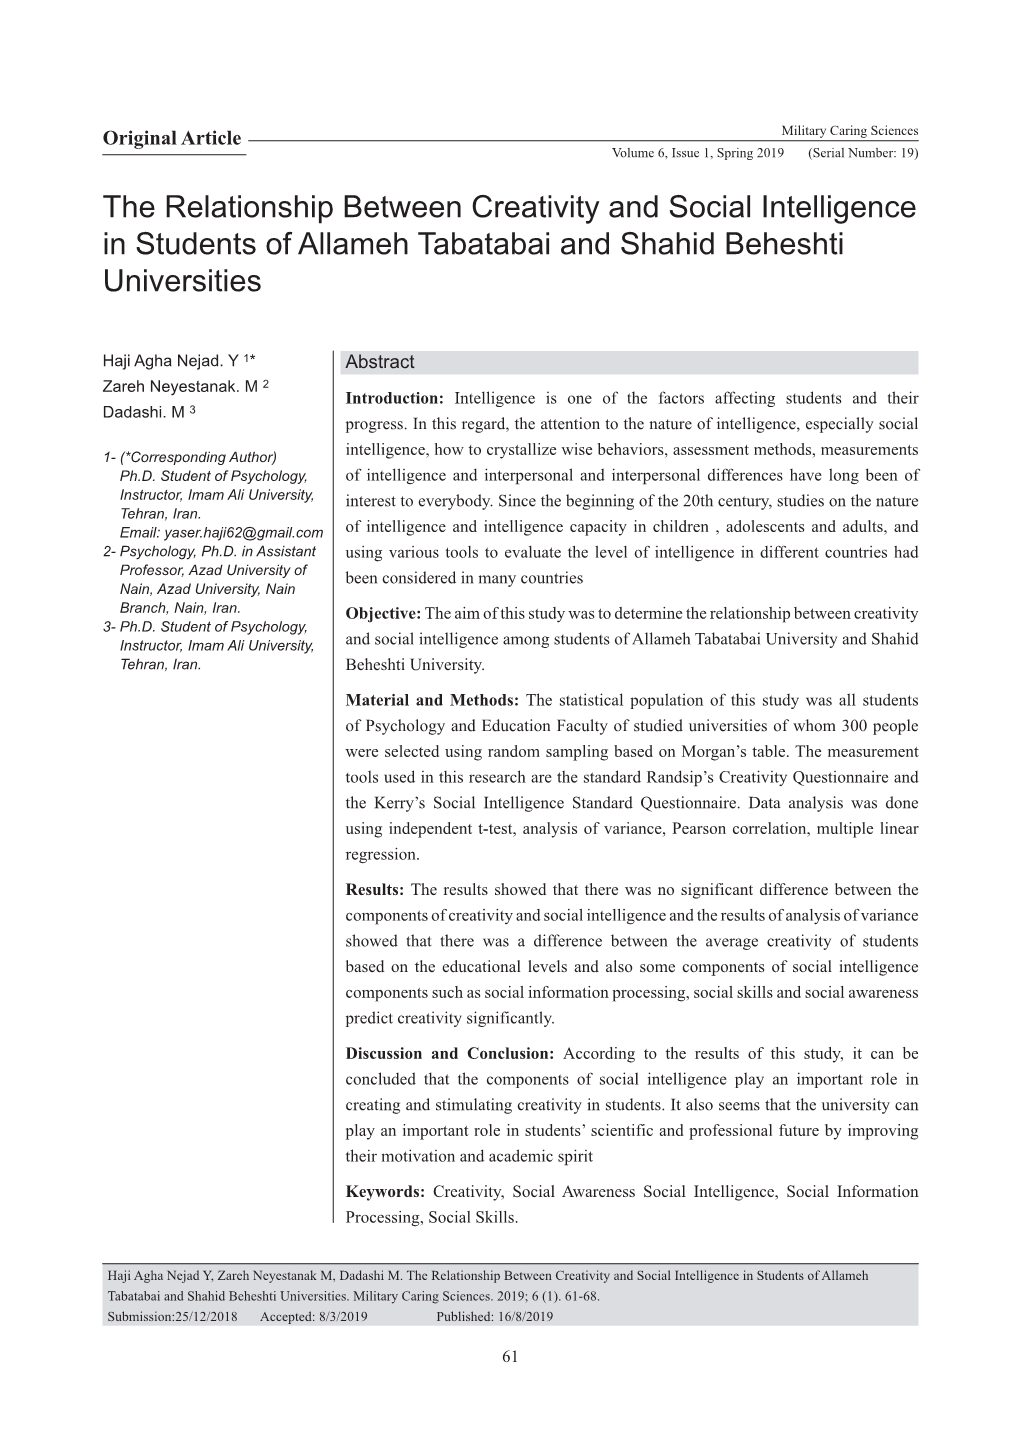 The Relationship Between Creativity and Social Intelligence in Students of Allameh Tabatabai and Shahid Beheshti Universities